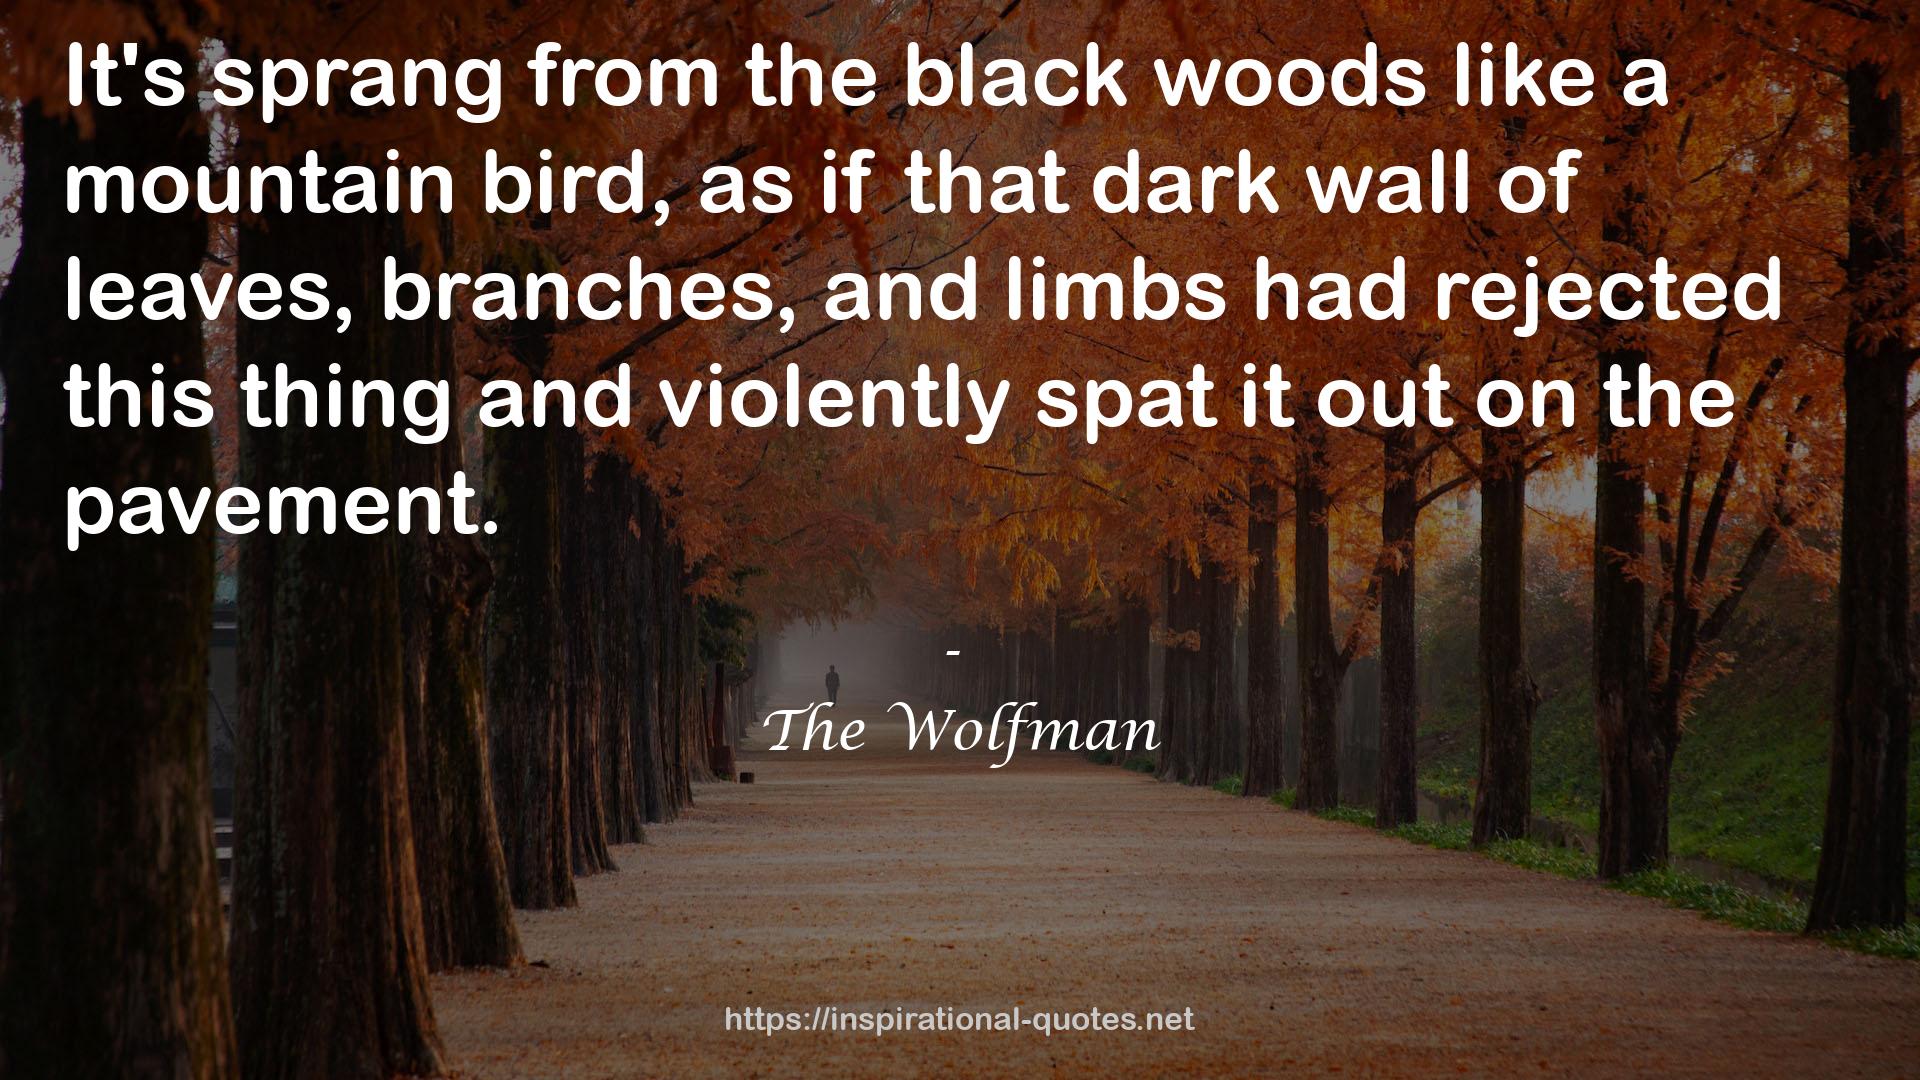 The Wolfman QUOTES